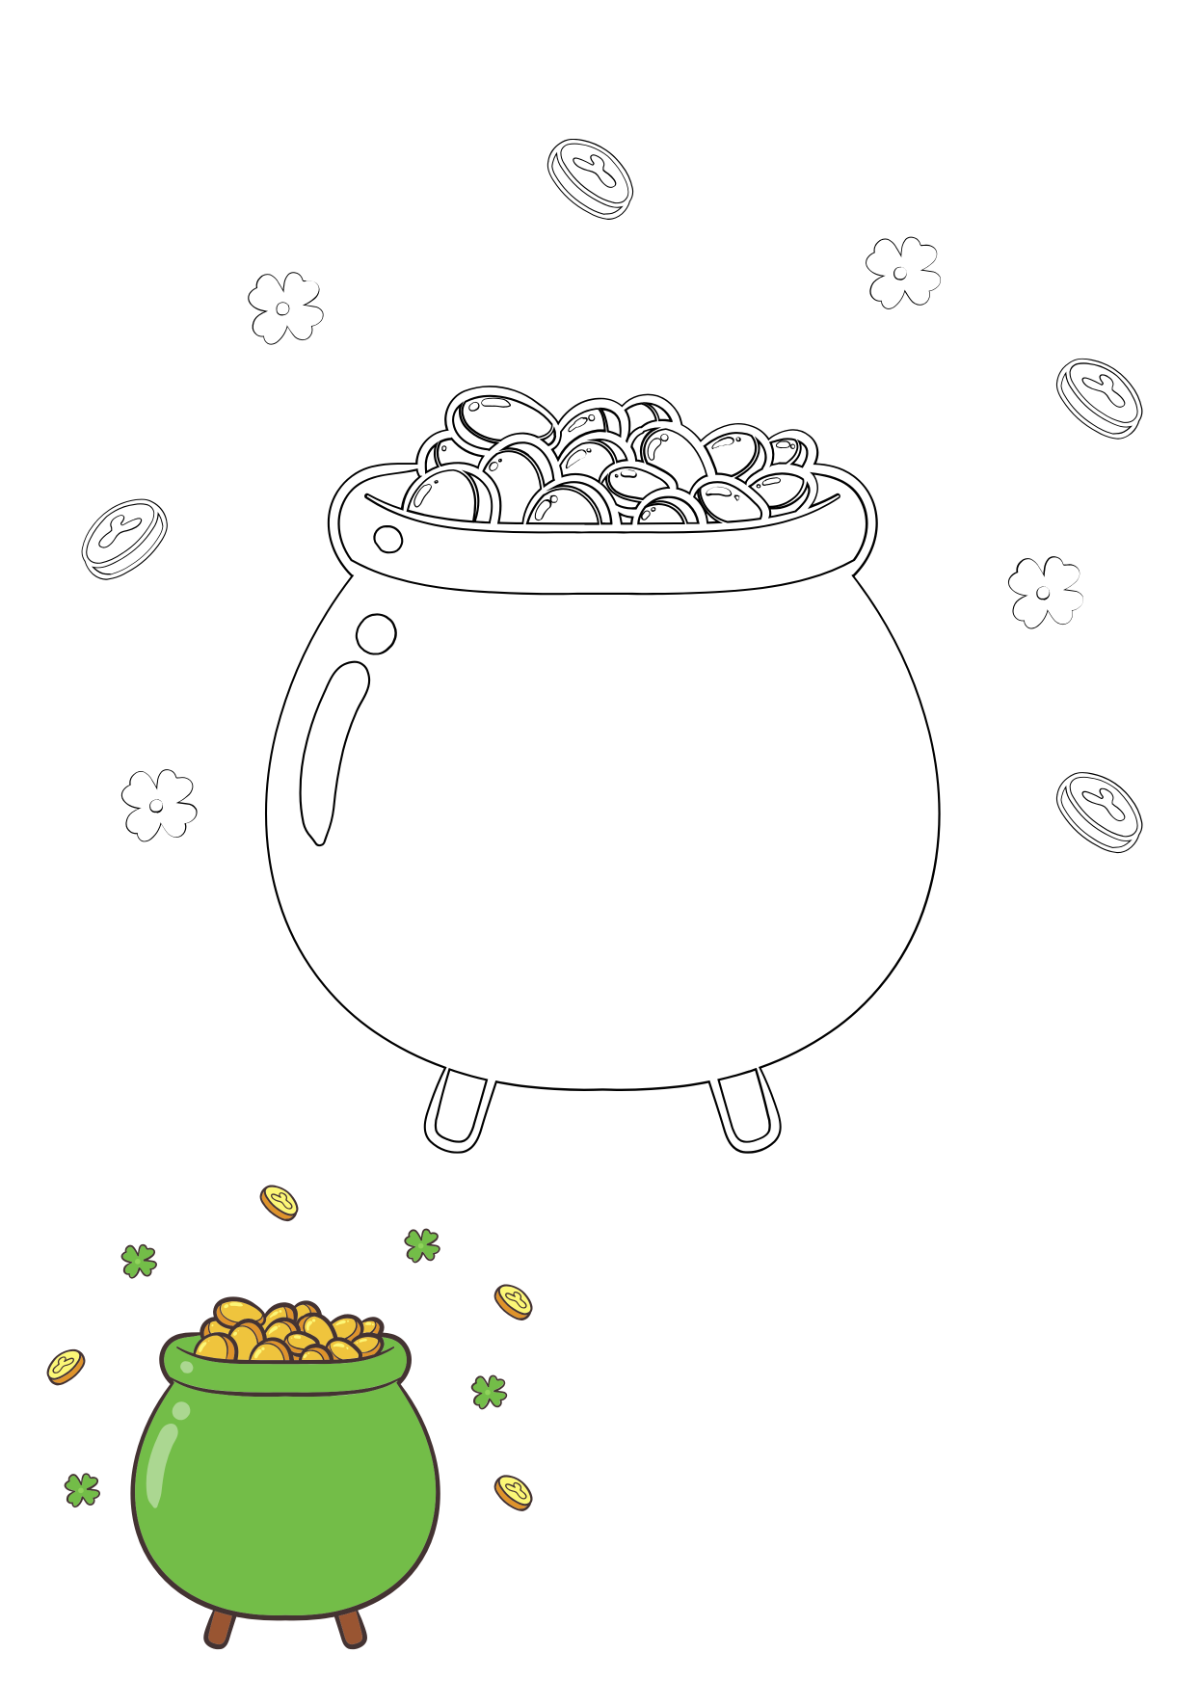 Free St. Patrick’s Day Coloring Page Template